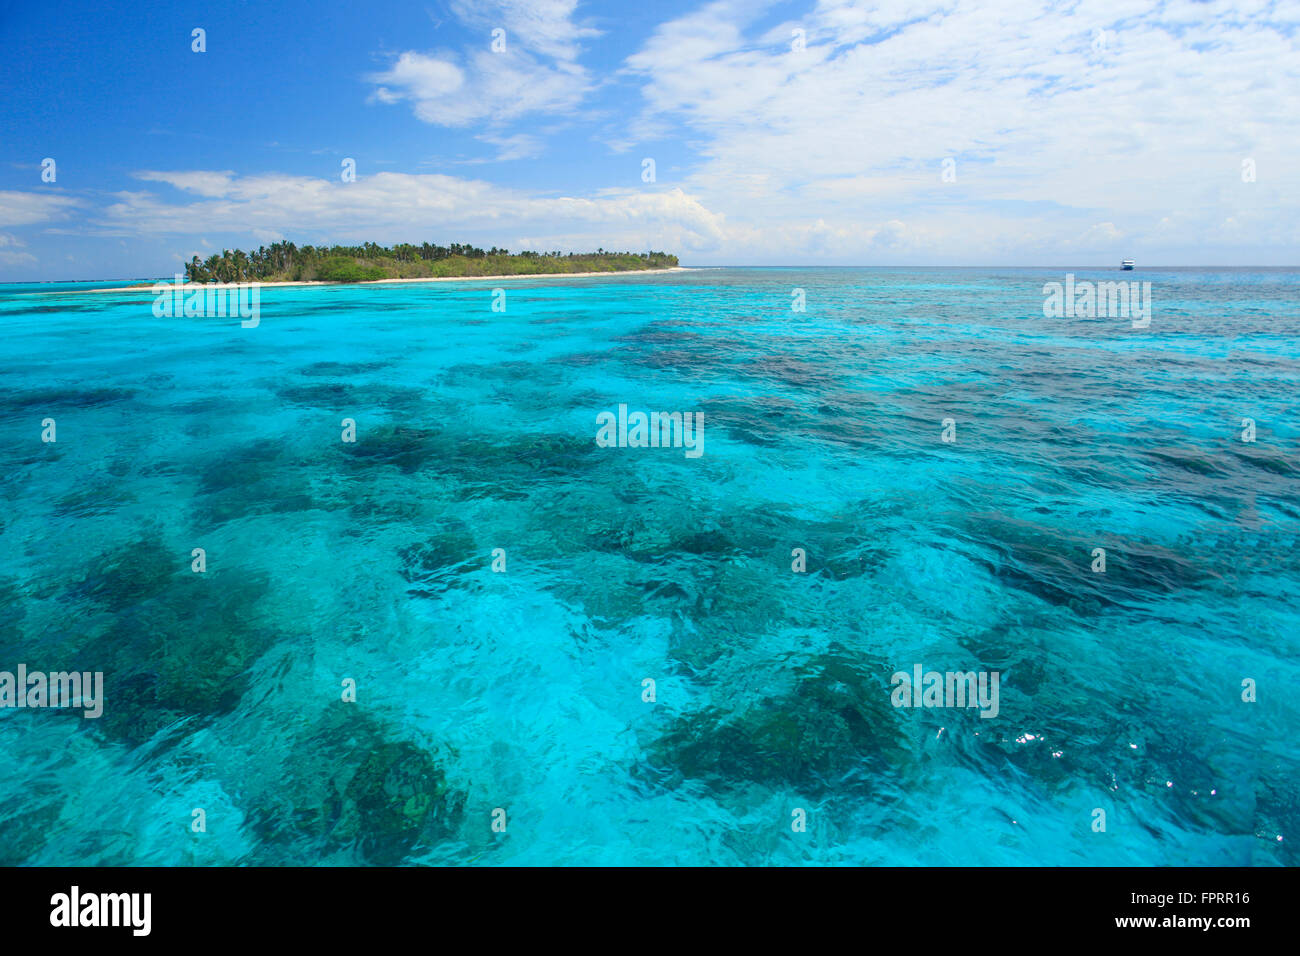 Half Moon Caye an island with remnant Cordia sebestena forest, protected coral lagoon, Belize Barrier Reef Reserve, Lighthouse Reef atoll, Belize Stock Photo